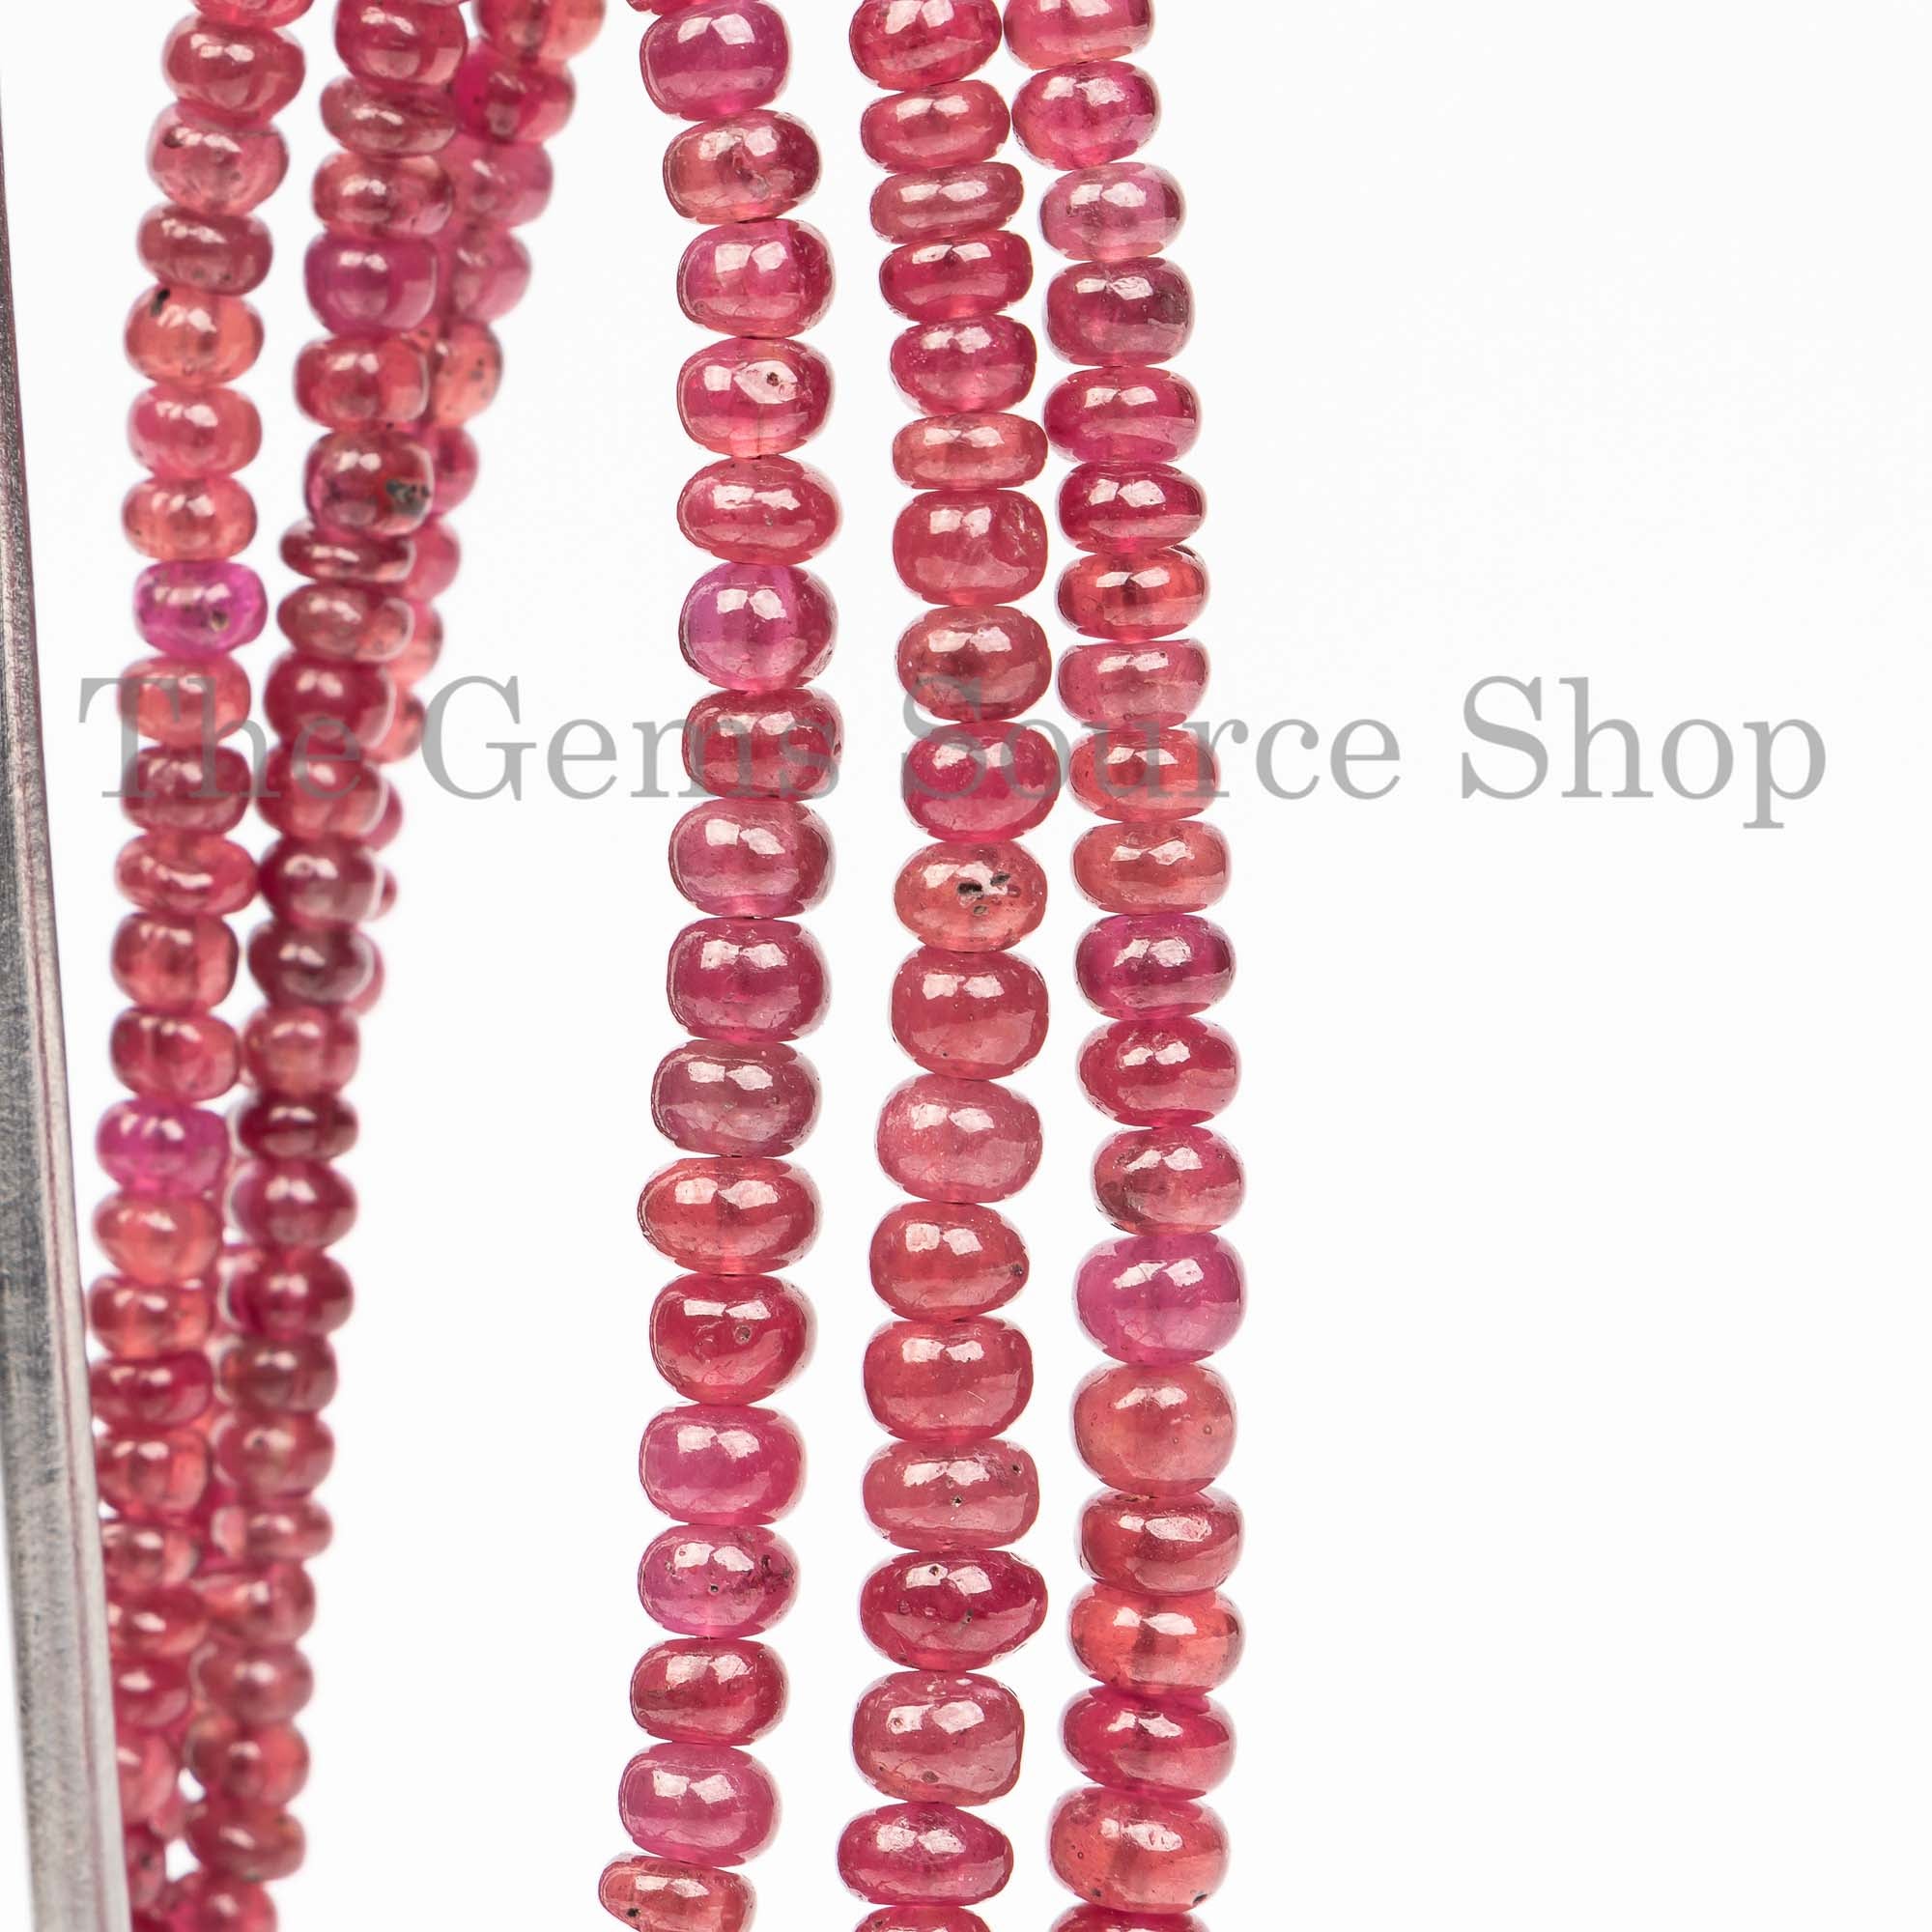 Natural Ruby Smooth Rondelle Beads, Ruby Beaded Gemstone For Jewelry Making, Wholesale Ruby Plain Beads